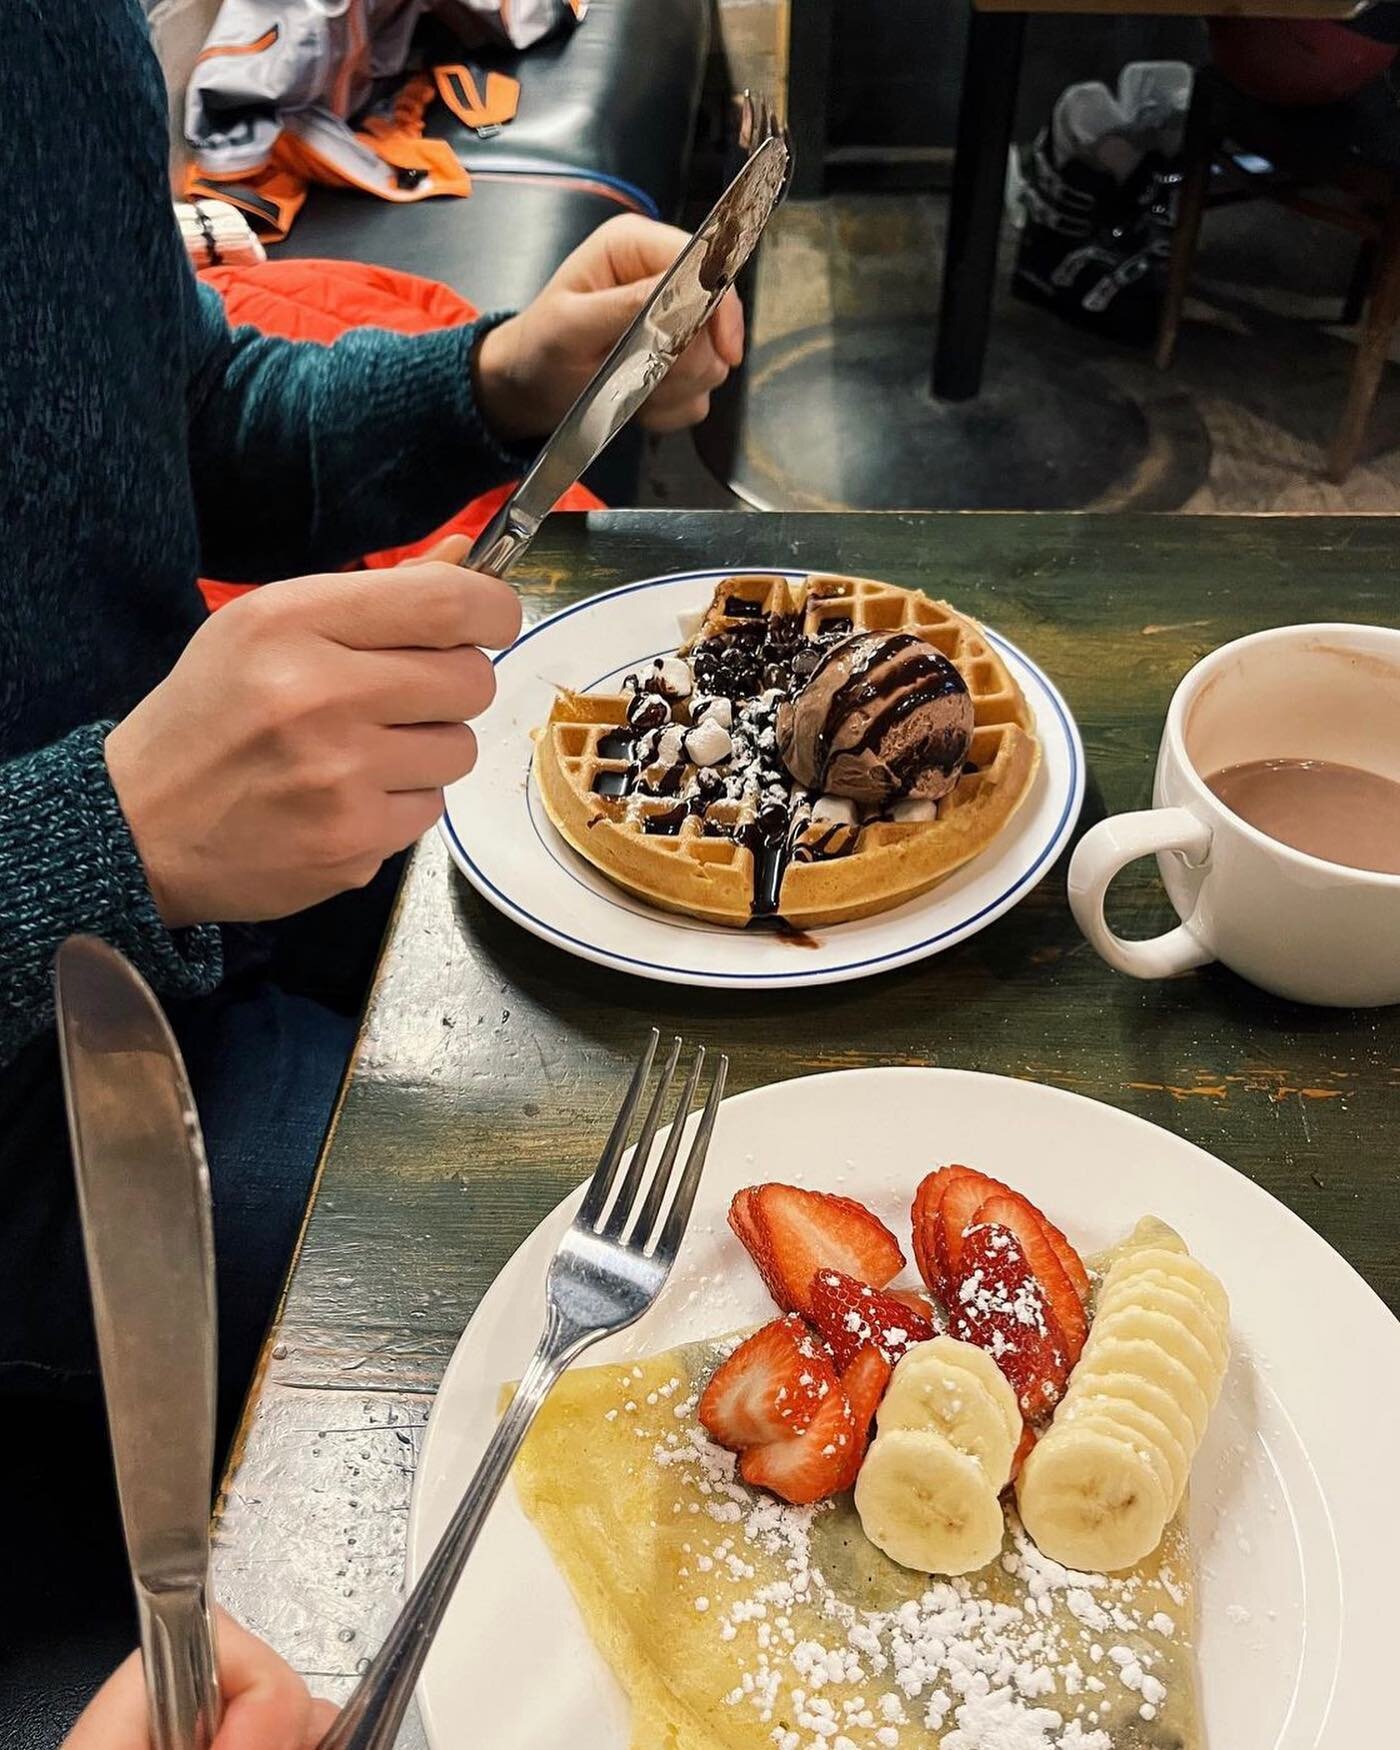 Waffles vs. Crepes &mdash; which one are you picking? 😋

📸: @mal.lyy